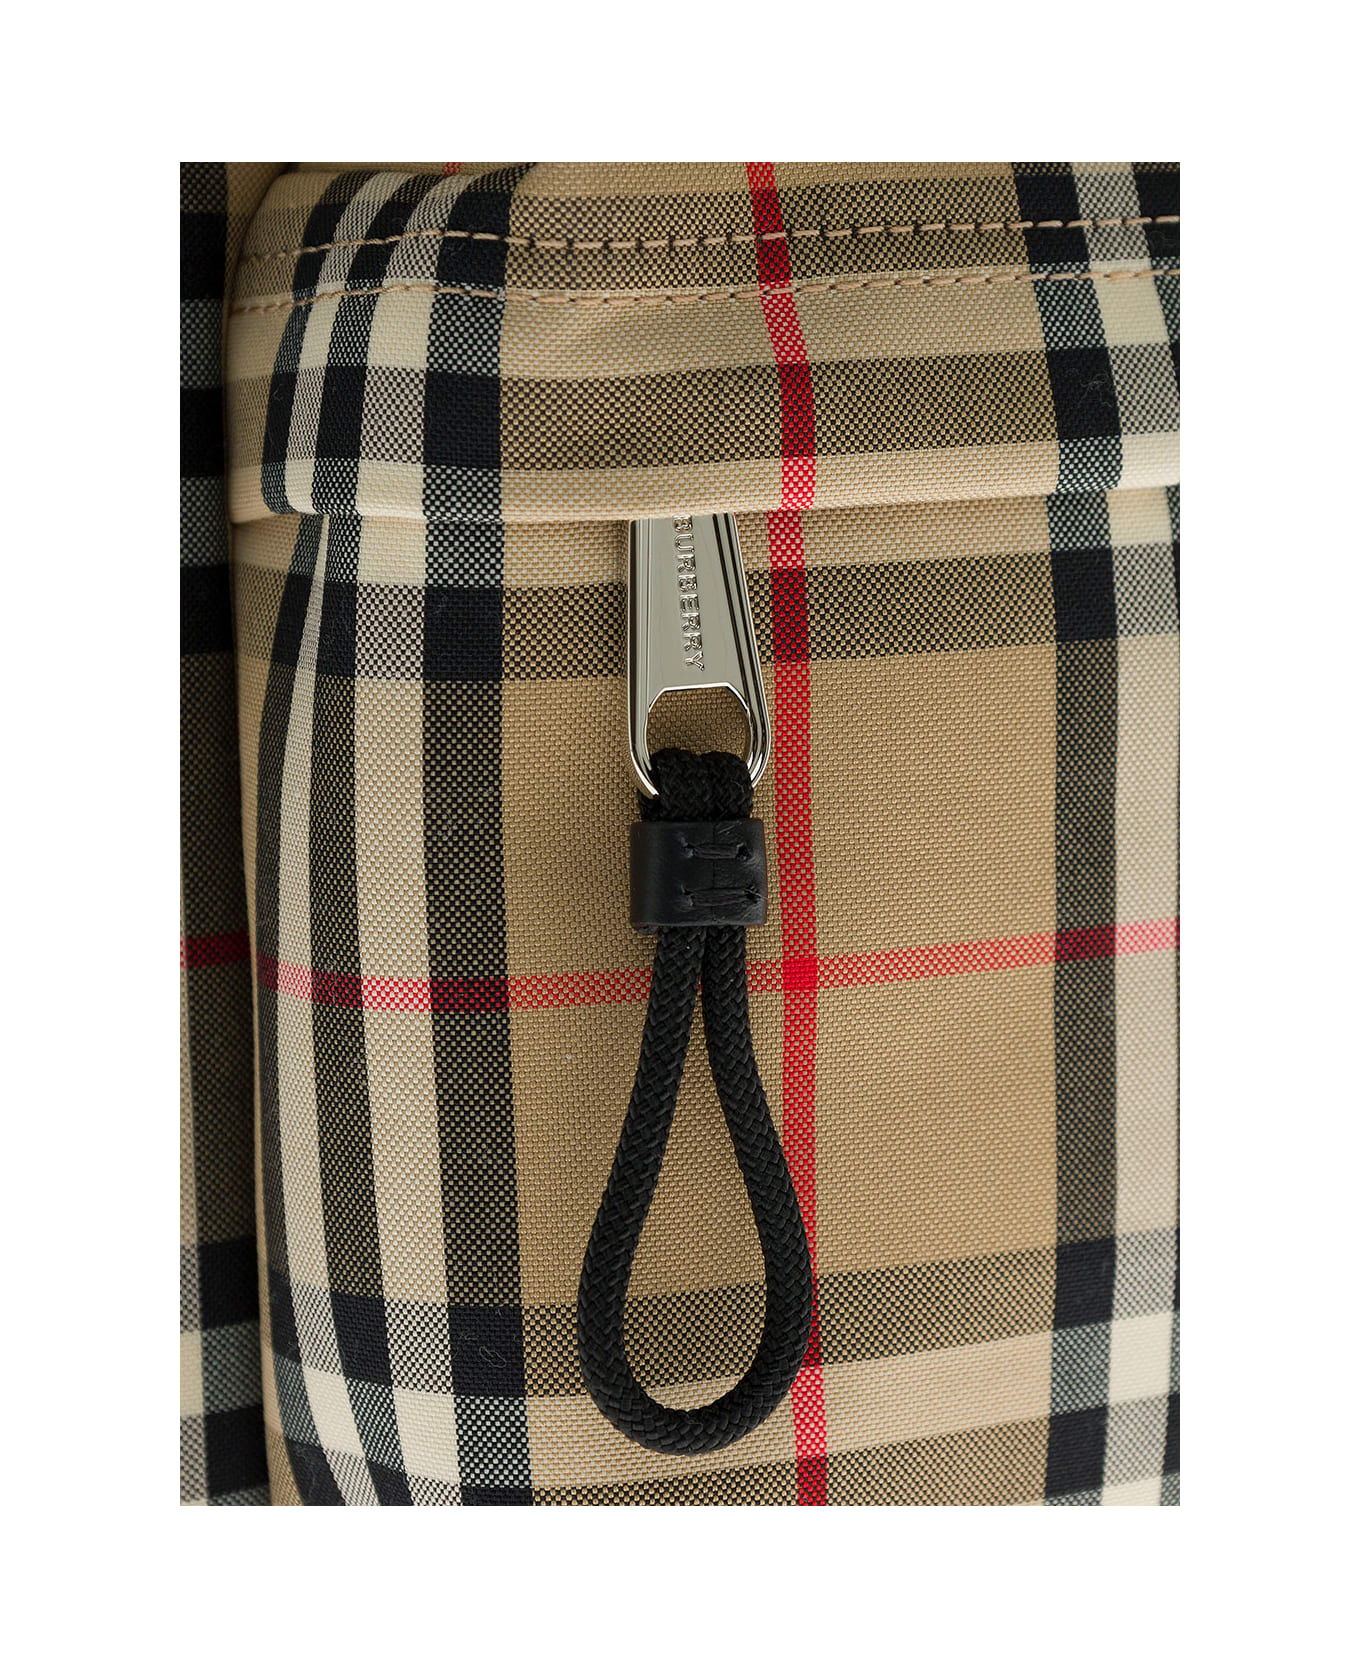 Burberry Man's Vintage Check Fabric Backpack - Beige